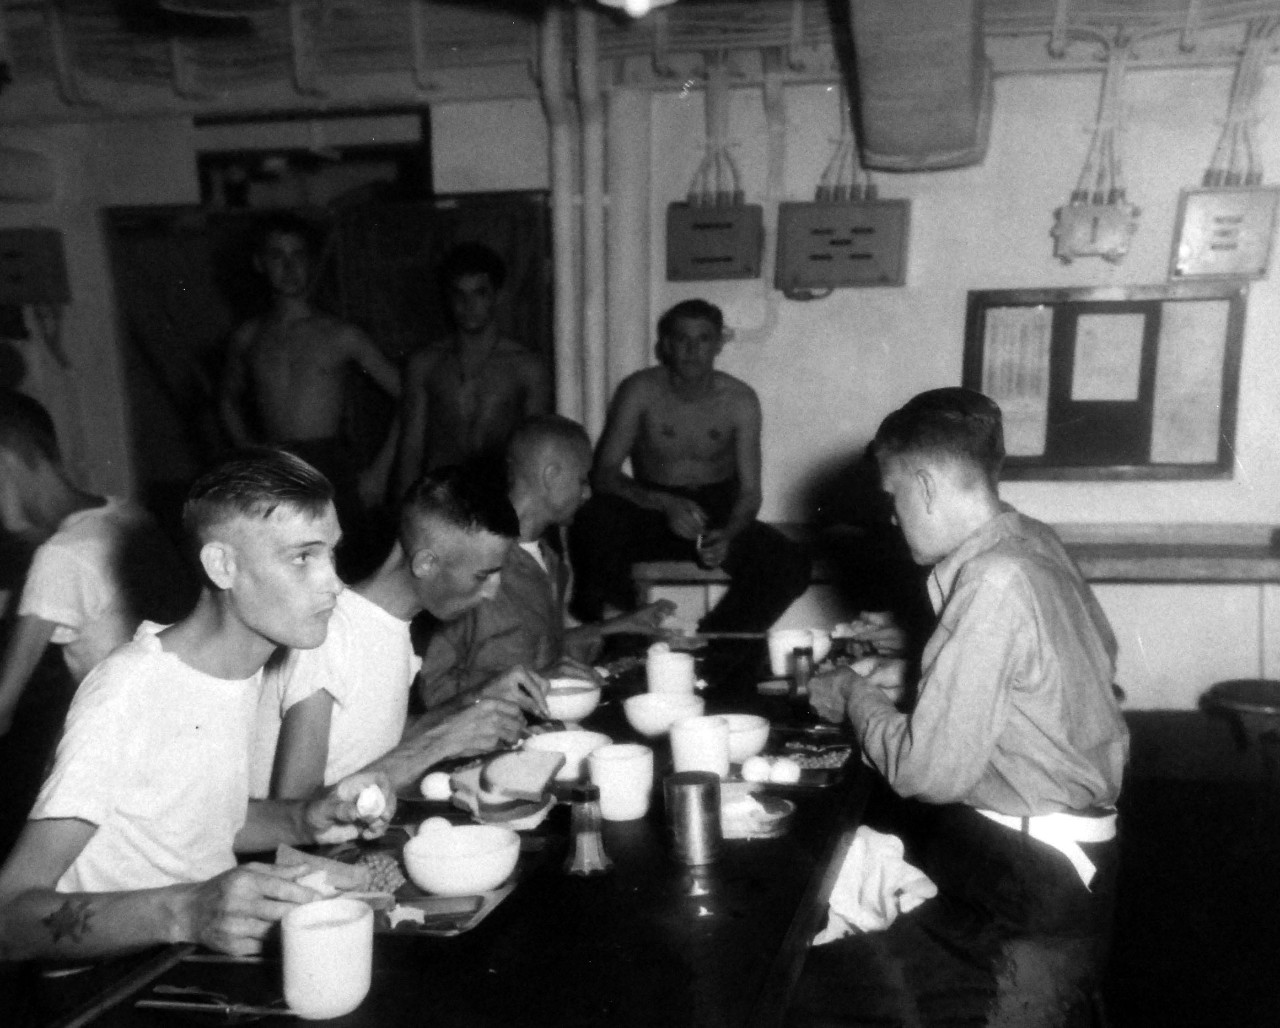 80-G-343552:    Allied Prisoner of War, Formosa, 1945.  Liberated British and Australian prisoners from a Formosan prison camp get their first real meal on board USS Block Island (CVE 106) after three years confinement in Formosan prison camps.   Photographed by Photographer’s Mate First Class T.K. Brett and Marine M. J. Kane (rank not given), September 5, 1945.   Official U.S. Navy photograph, now in the collection of the National Archives.  (5/22/2014).   